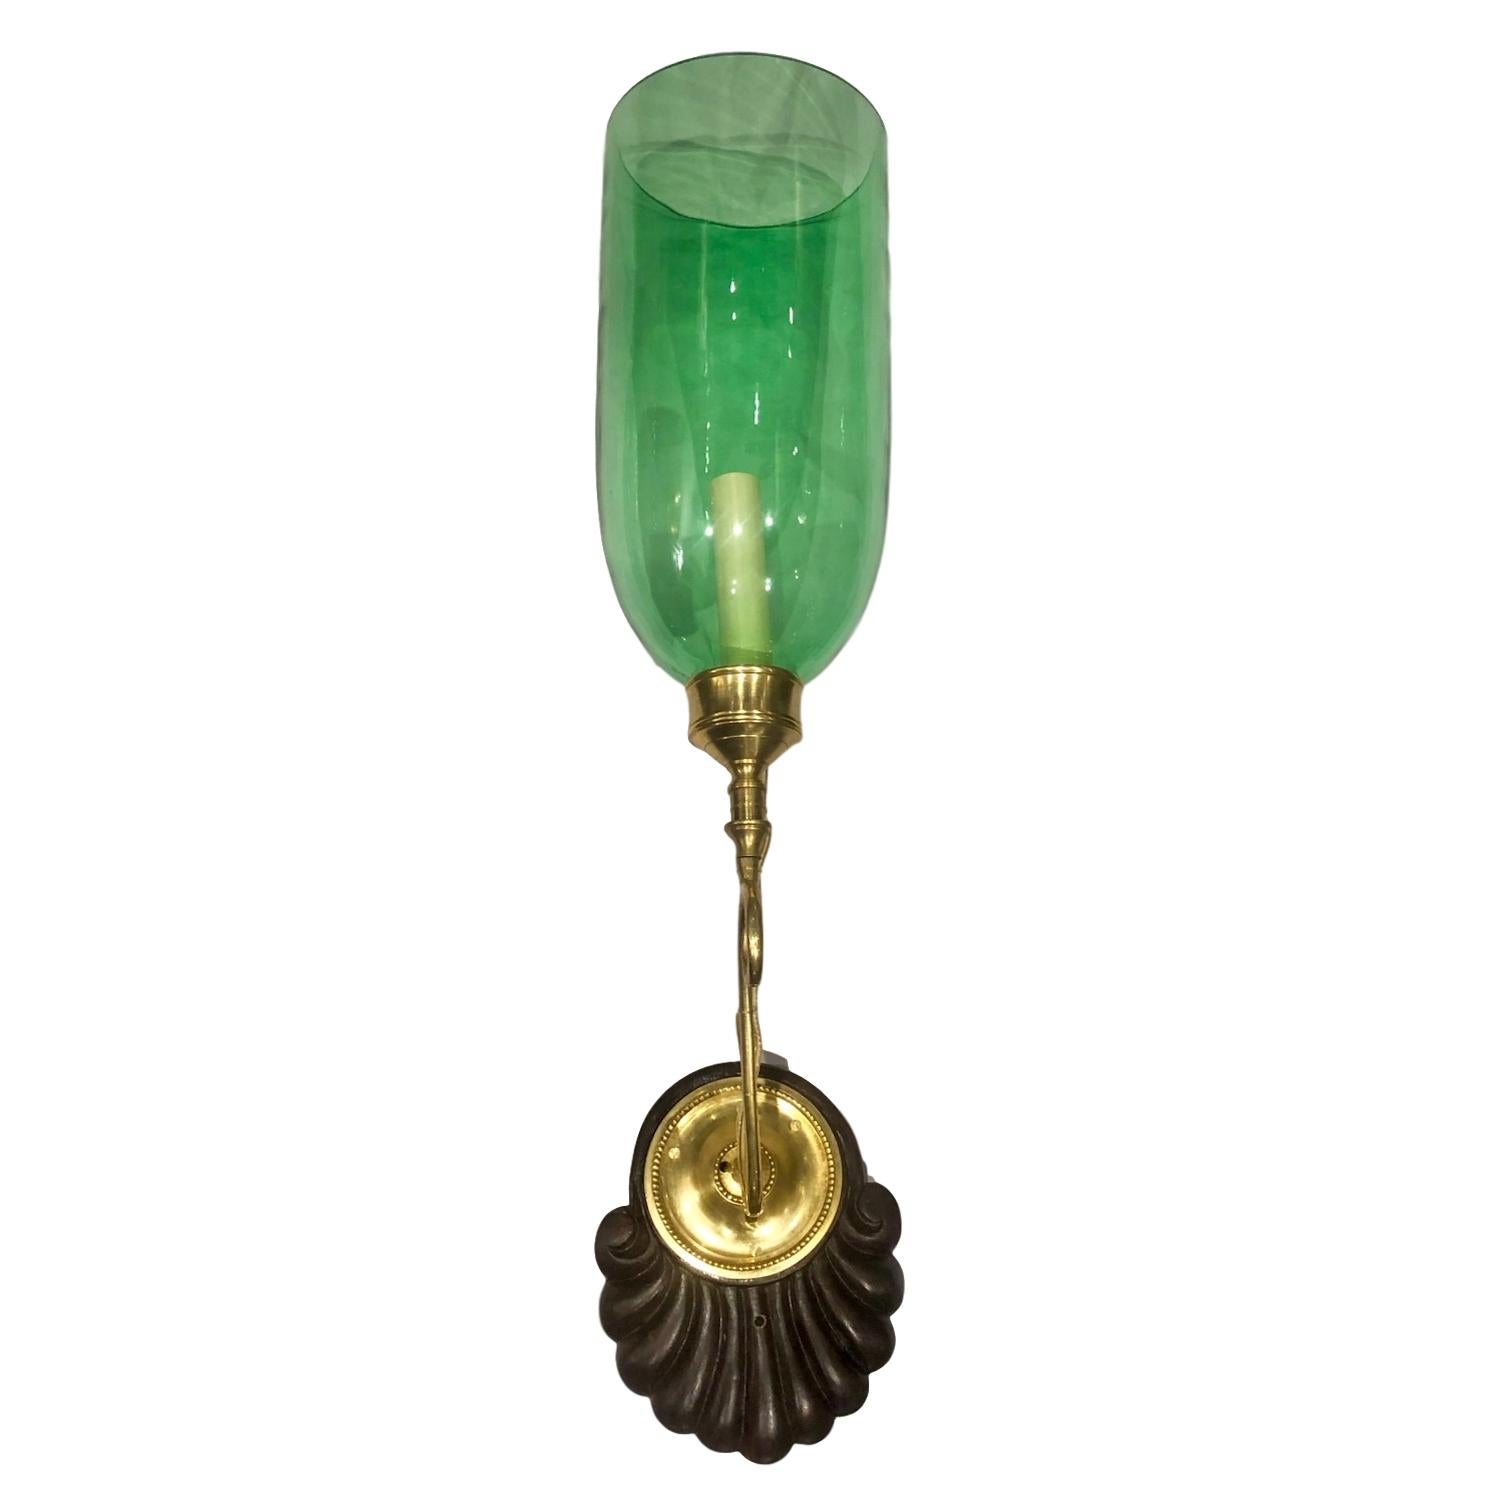 A set of four circa 1920s Anglo-Indian single light sconces with hand carved wood backplate and emerald green blown glass hurricanes. Sold per pair.

Measurements:
Height 24?
Depth 12?
Width 5.5?